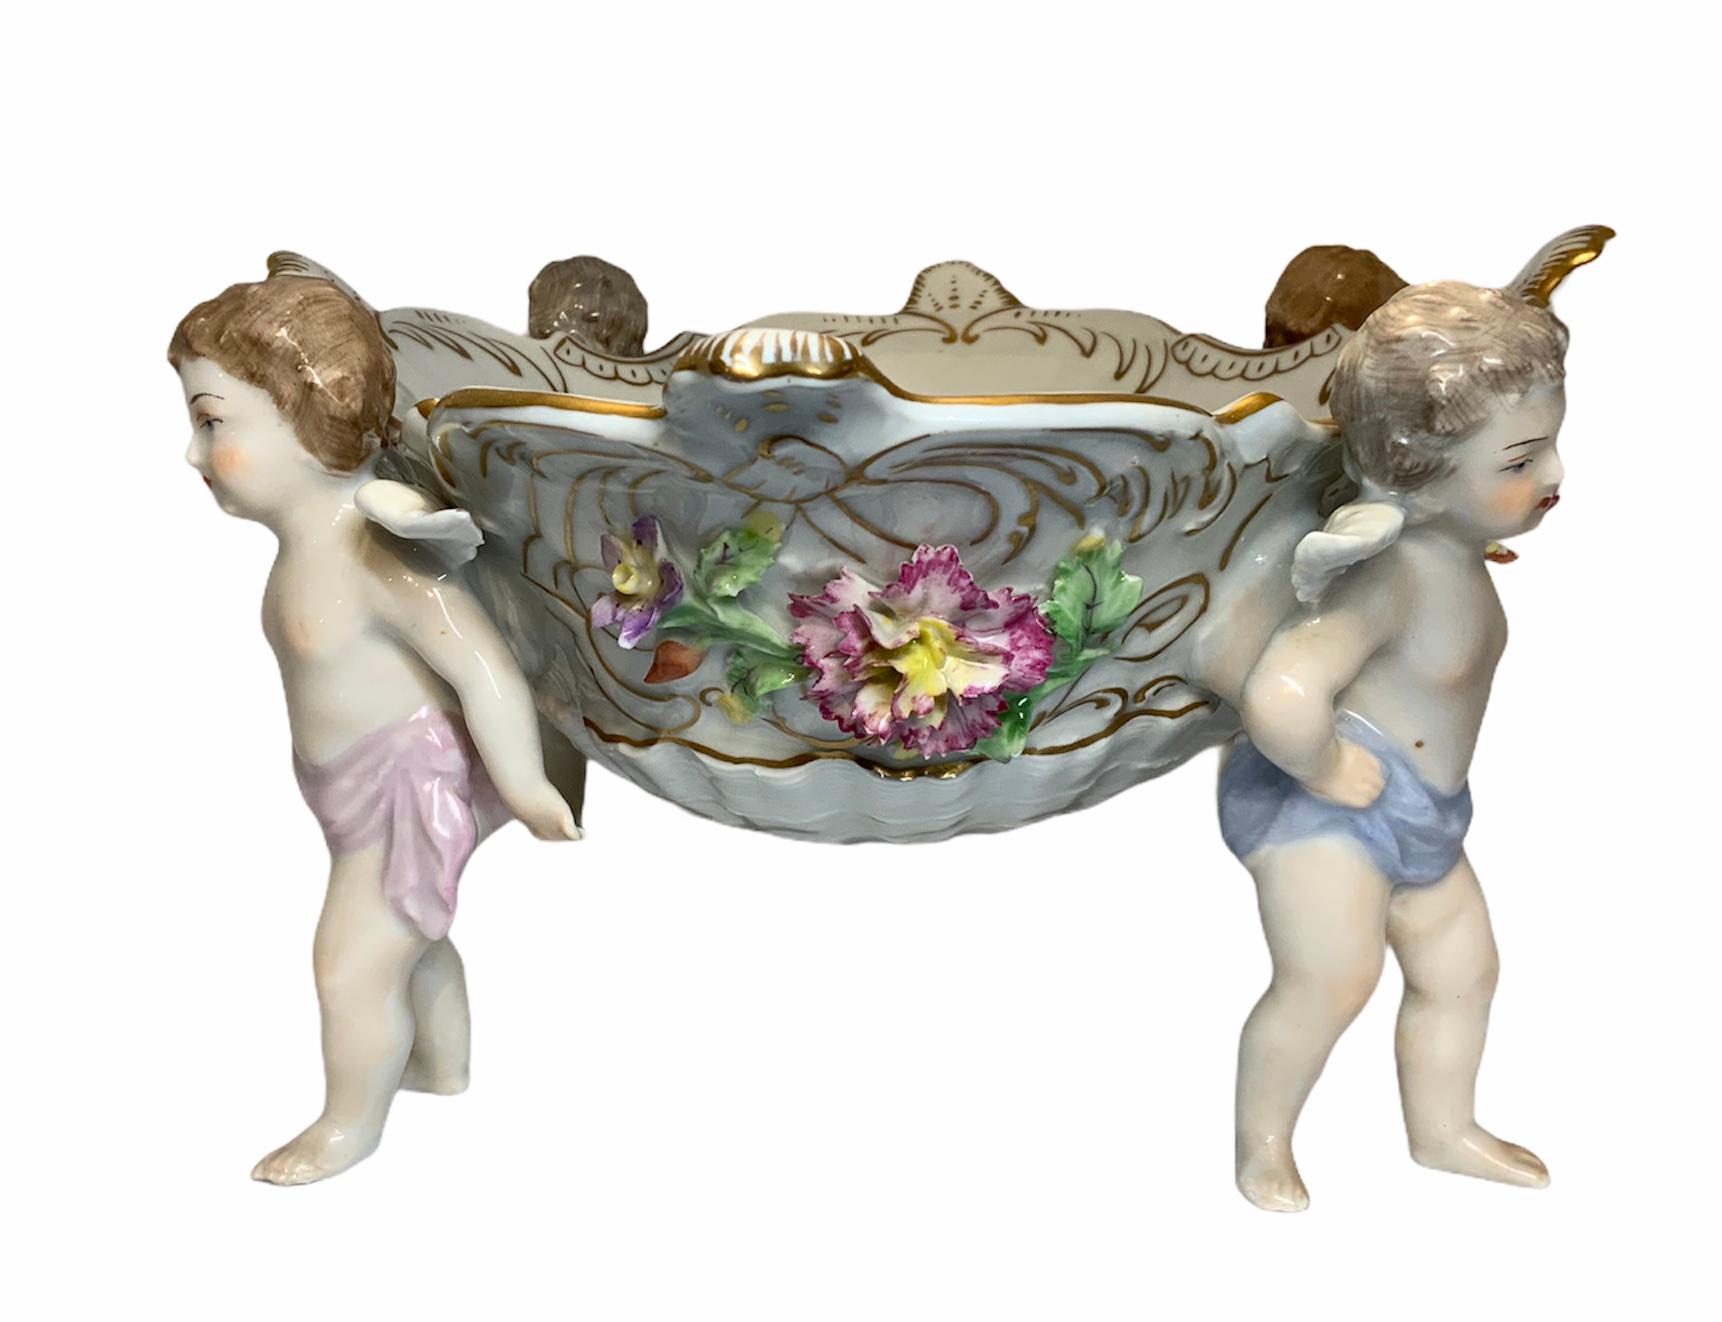 This is a Dresden porcelain depicting four winged cherubs holding a quatrefoil shaped compote. Repousse colorful flowers and gilt scrolls adorned the outside of the white compote. Inside of the compote there is hand painted bouquet of flowers and